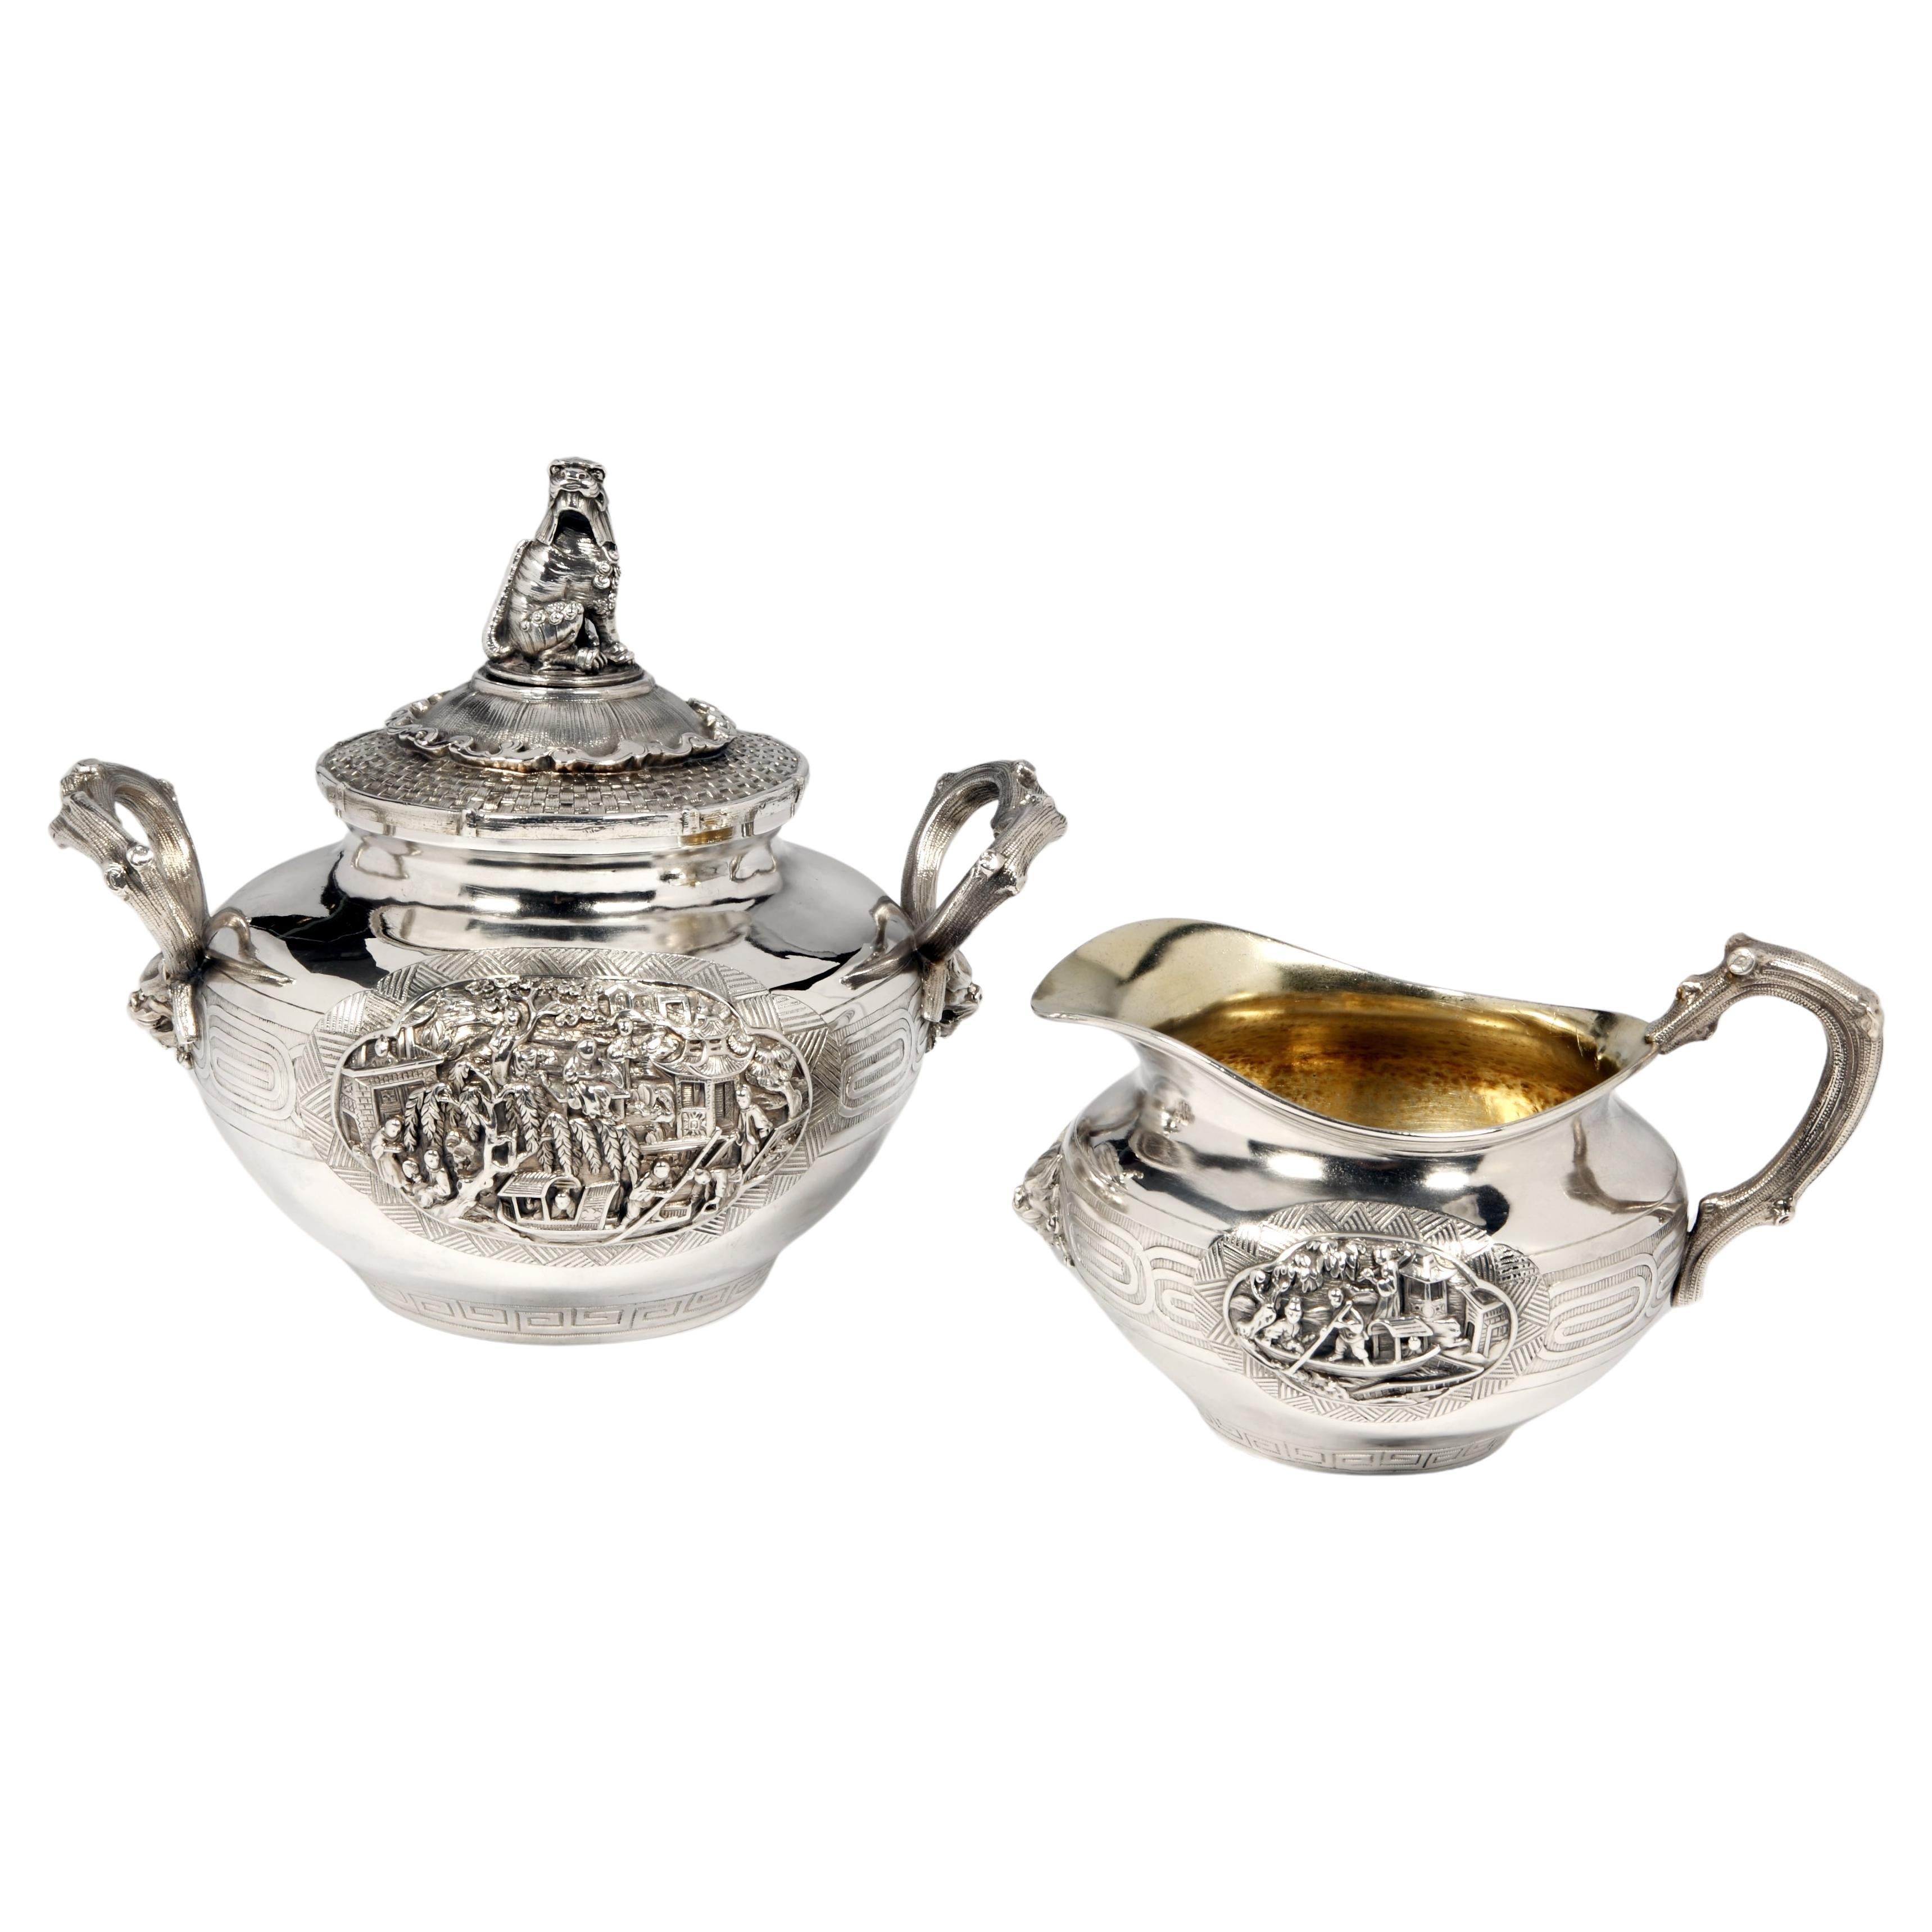 Orfèvre Duponchel - Creamer And Sugar Bowl In Sterling Silver Nineteenth